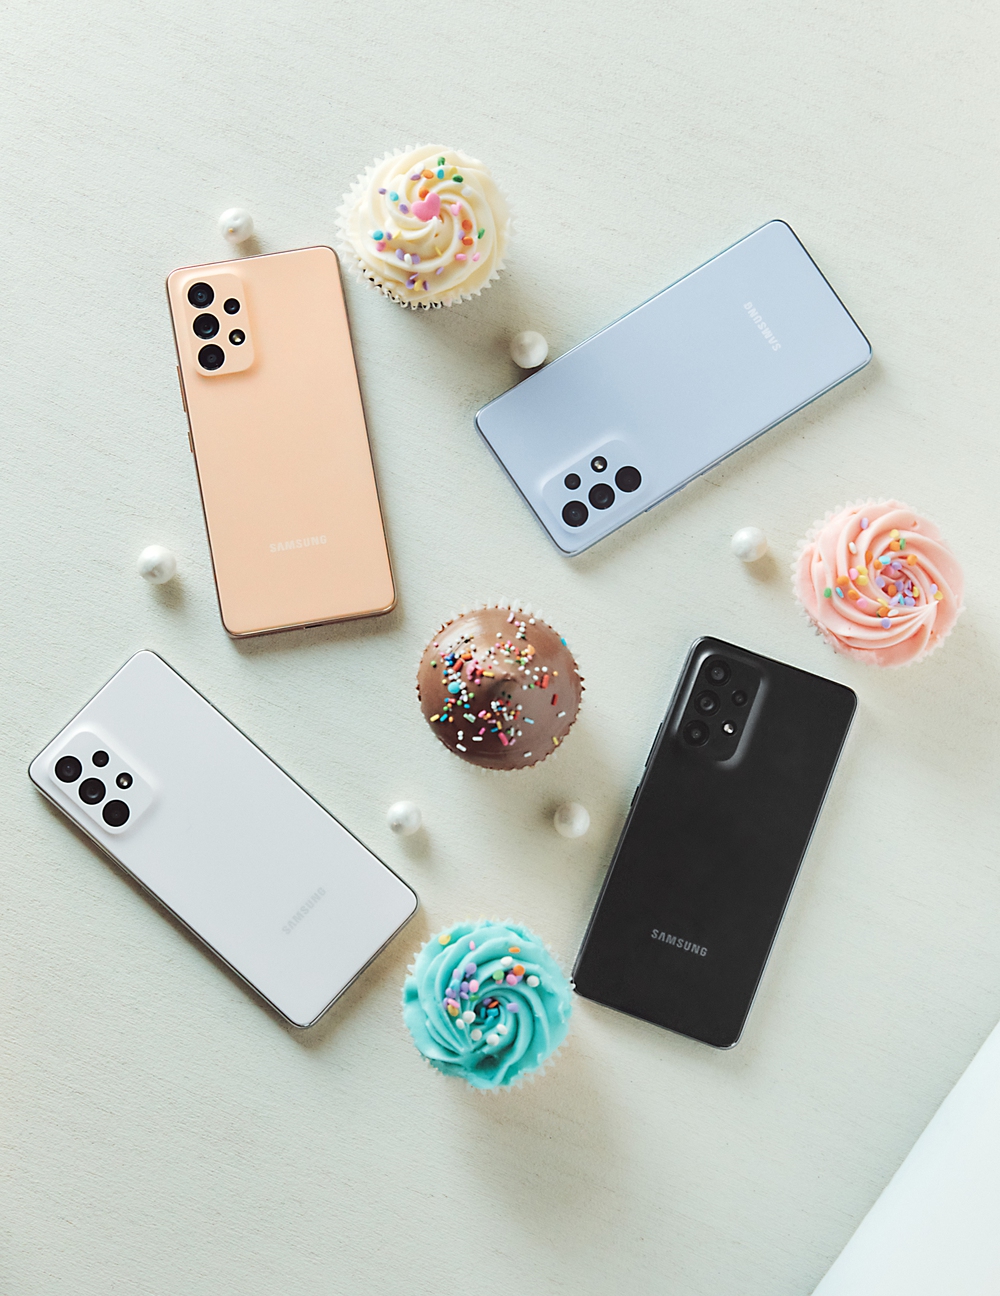 Galaxy A 2022 launched with 3 versions, available for pre-order from March 18 - Photo 6.